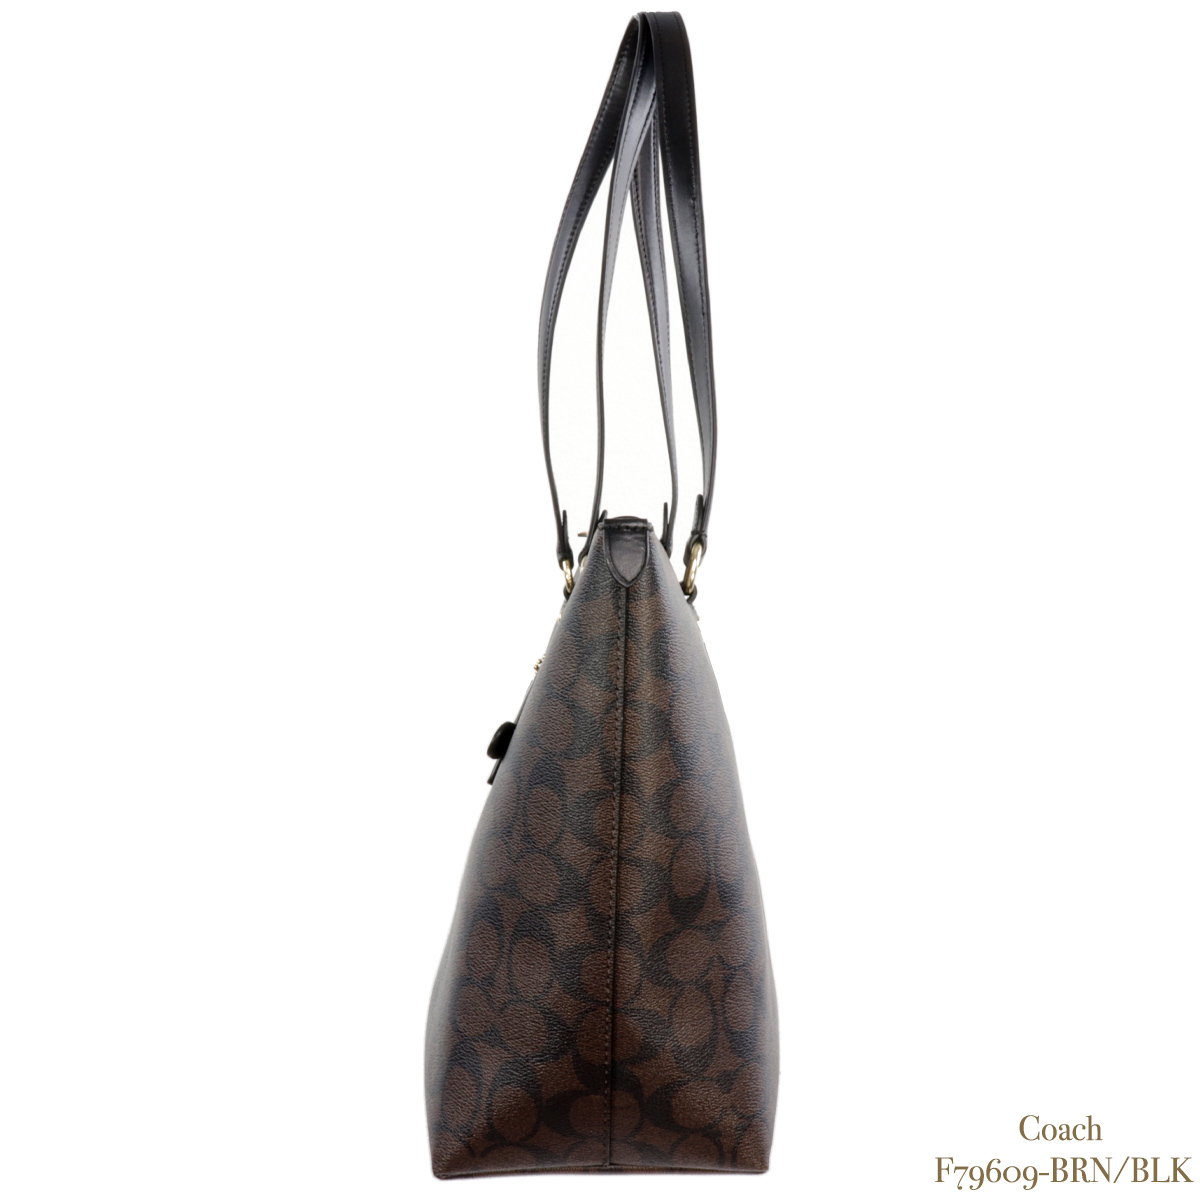 COACH Pebbled Leather Town Tote SKU: 9445378 